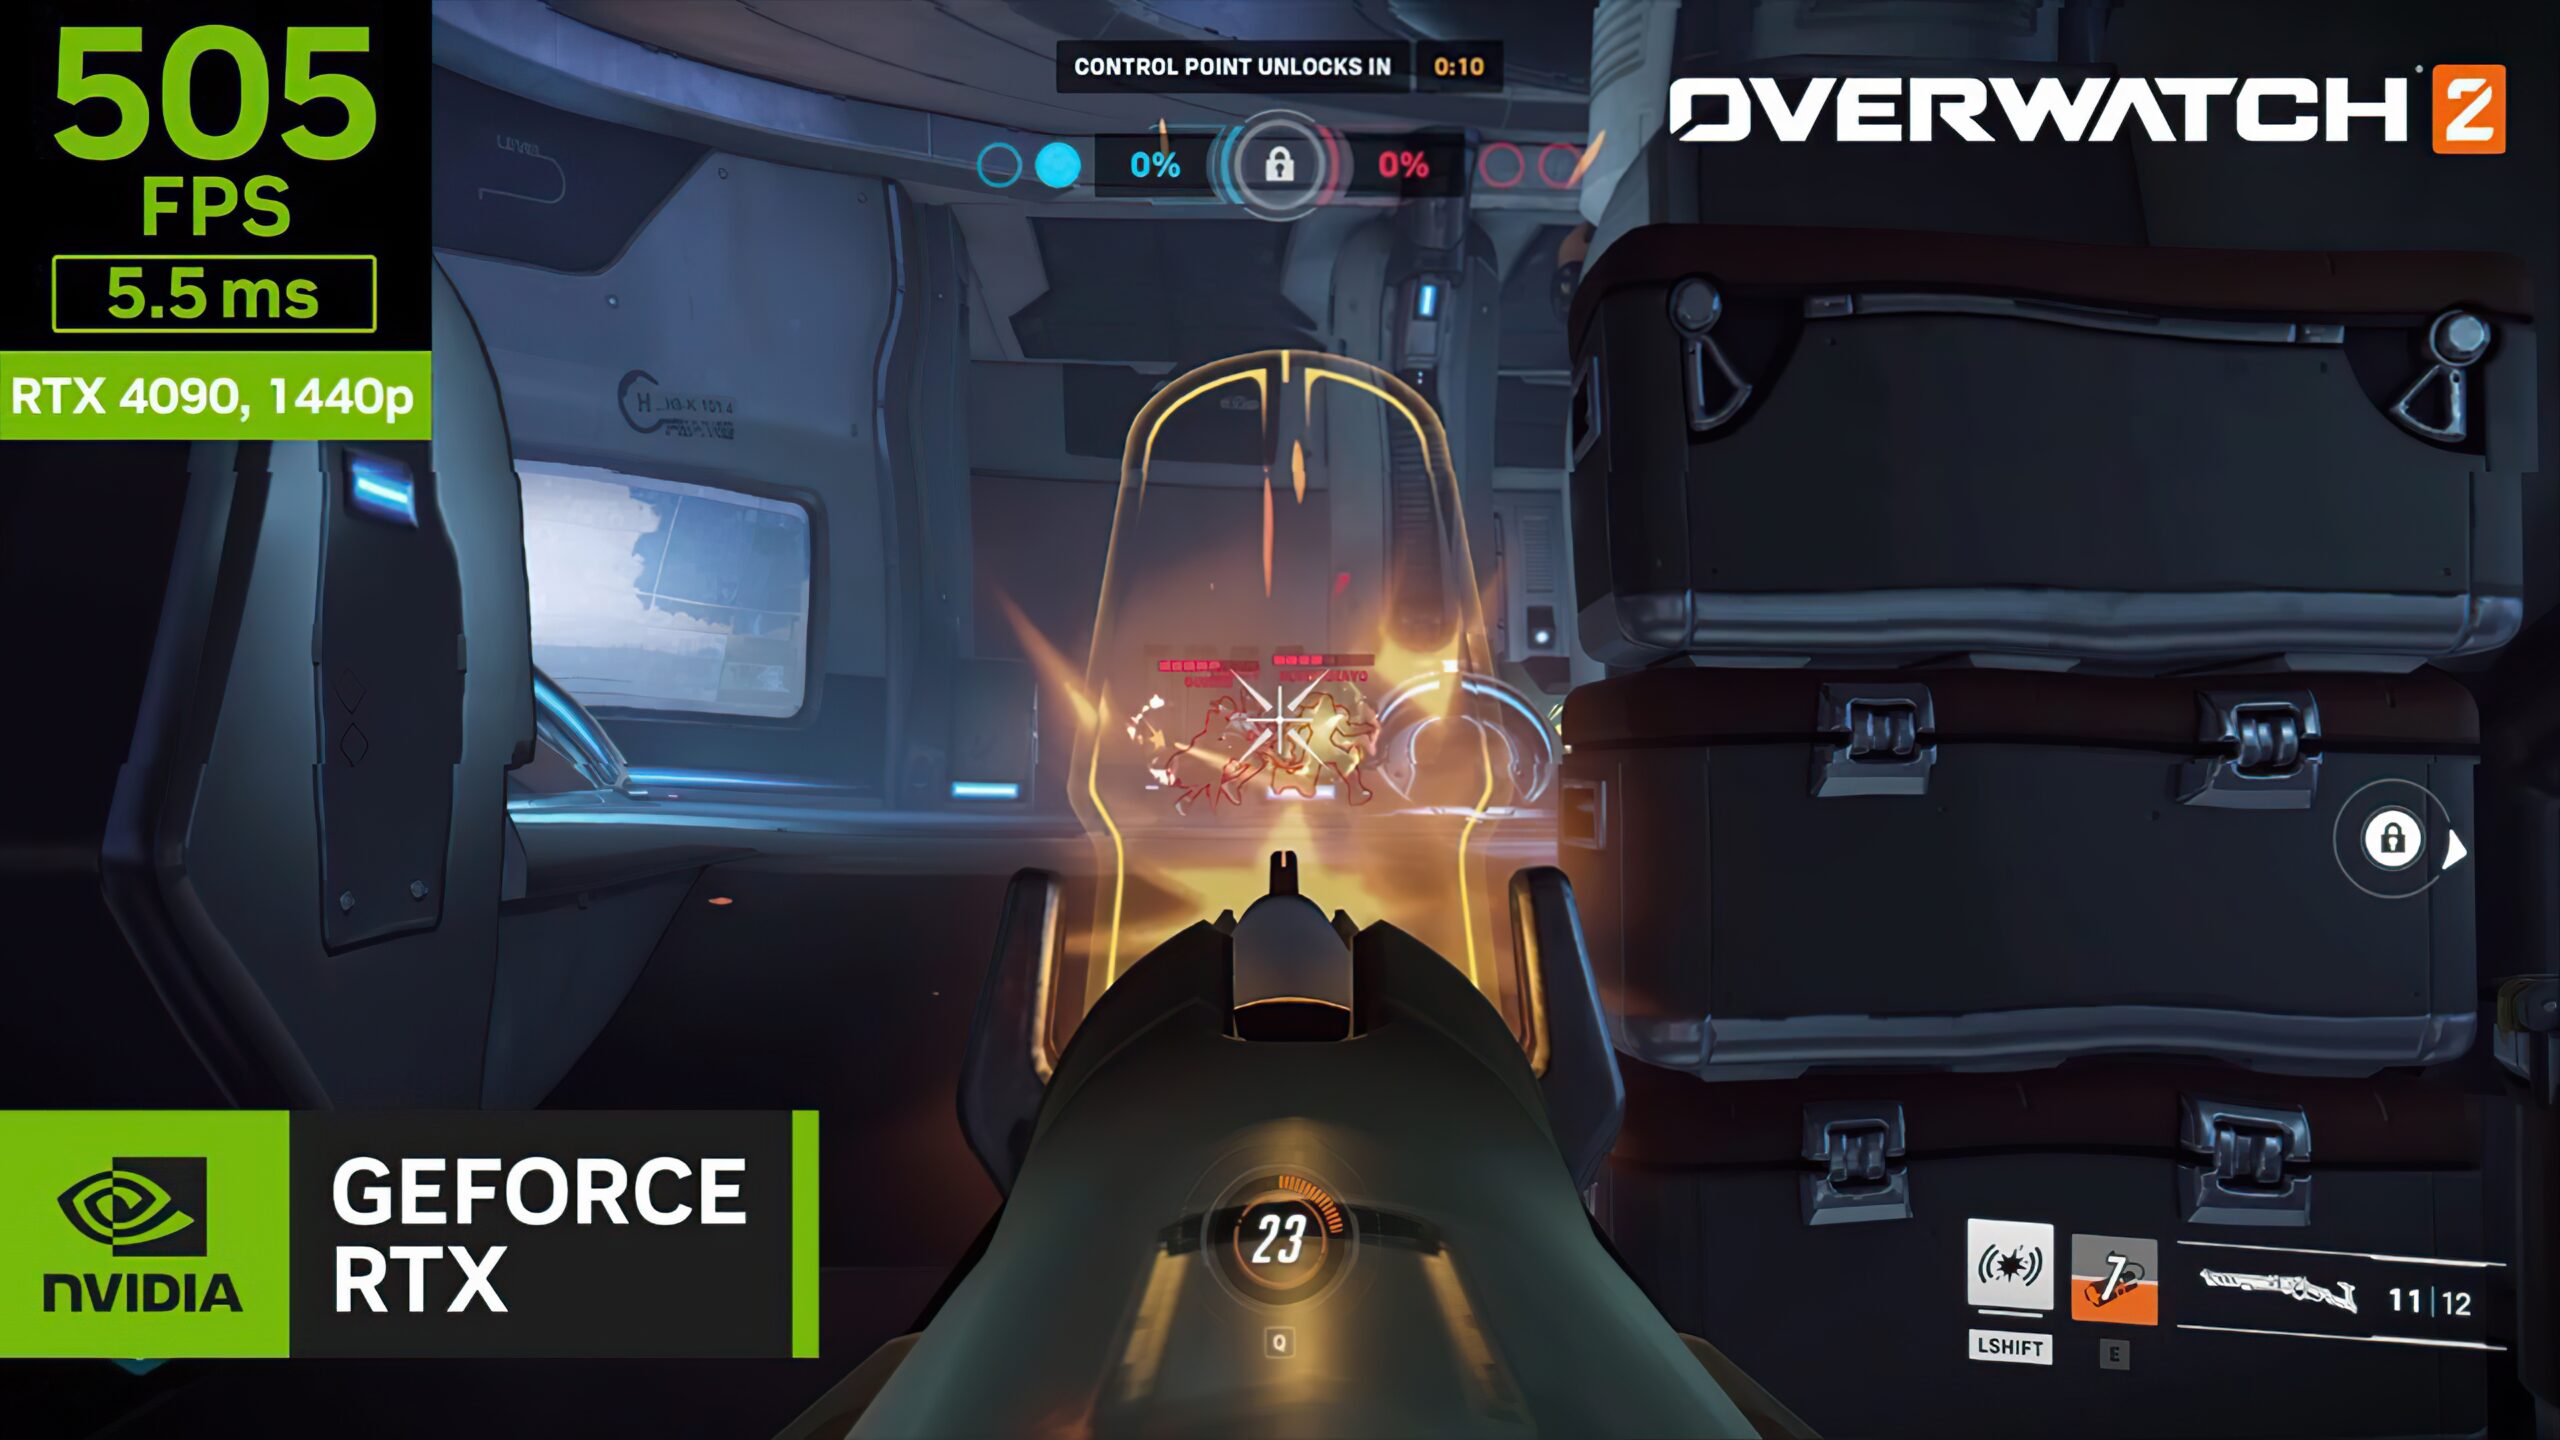 Overwatch 2 runs at over 500 FPS on an RTX 4090 with 1440p resolution